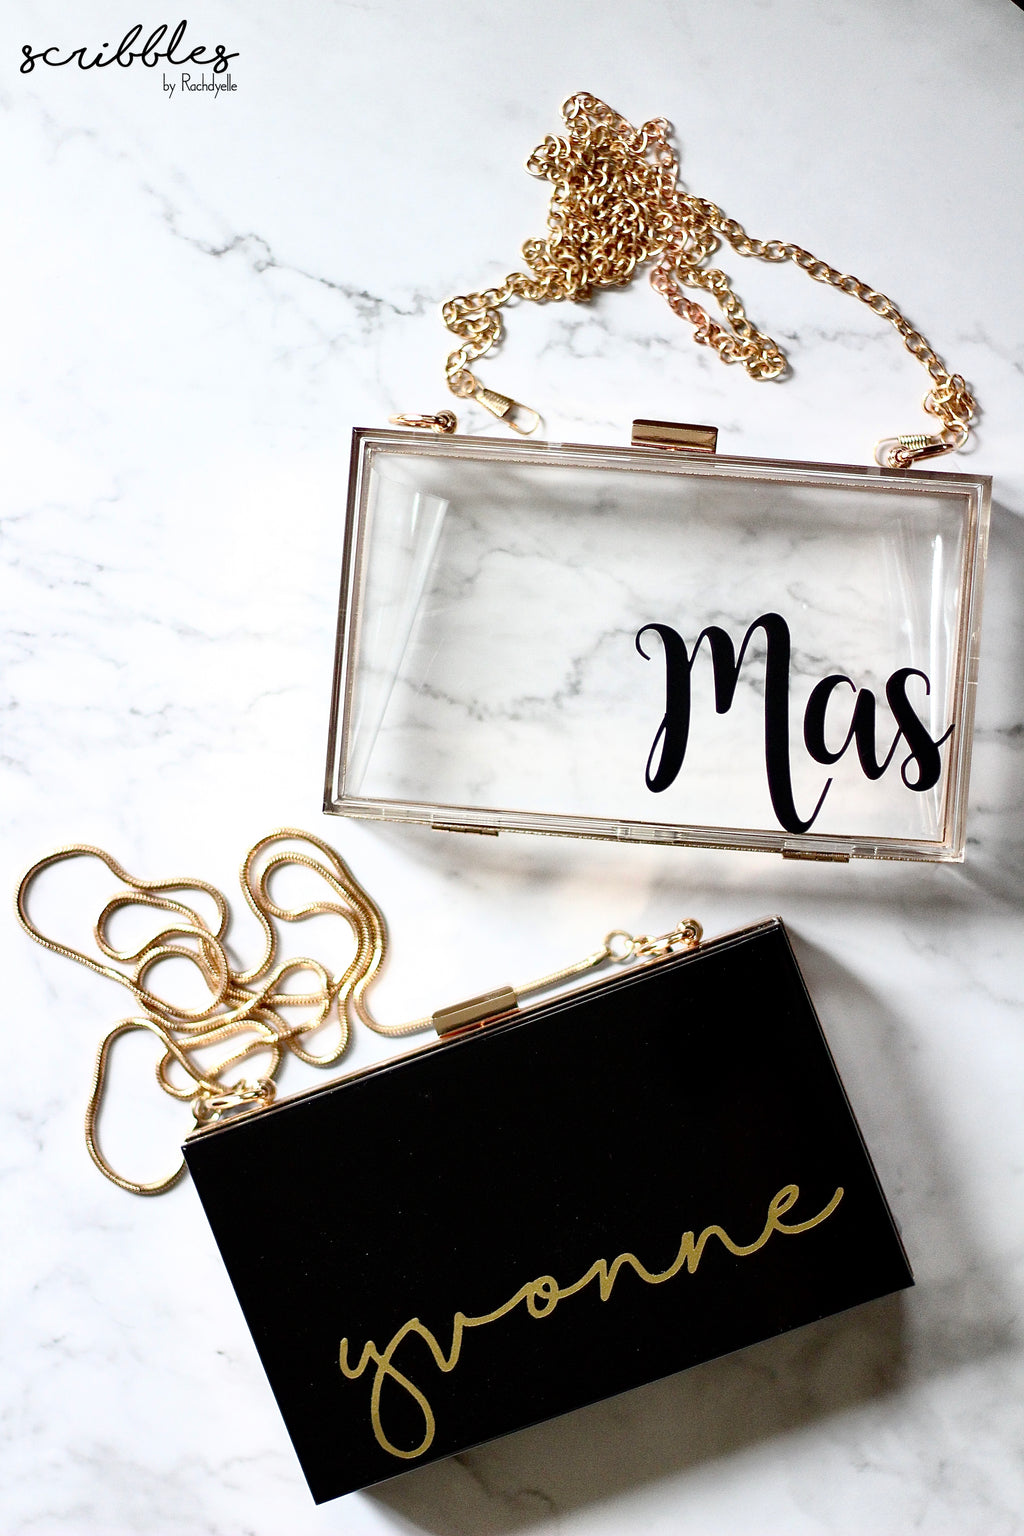 Personalised Box Clutch - Scribbles by Rachdyelle